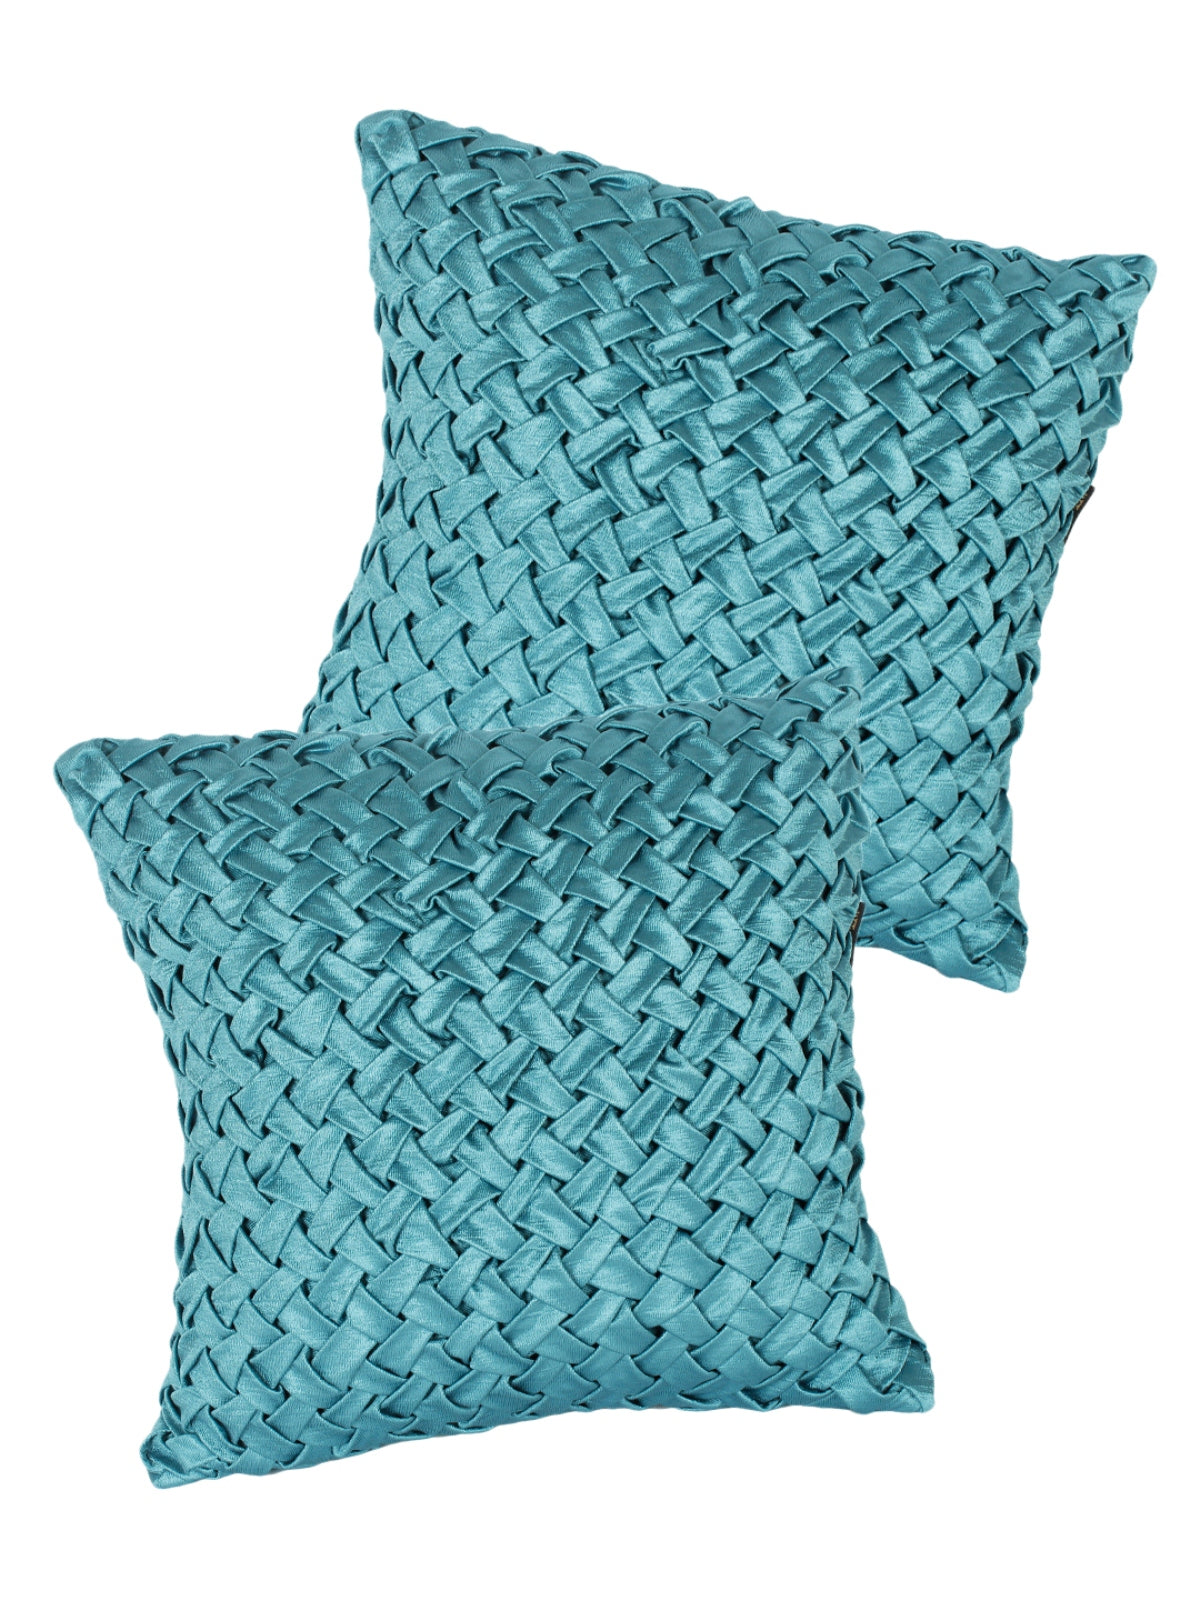 Polyester Fabric Geometric Cushion Cover 16x16 Set of 2 - Turquoise Blue